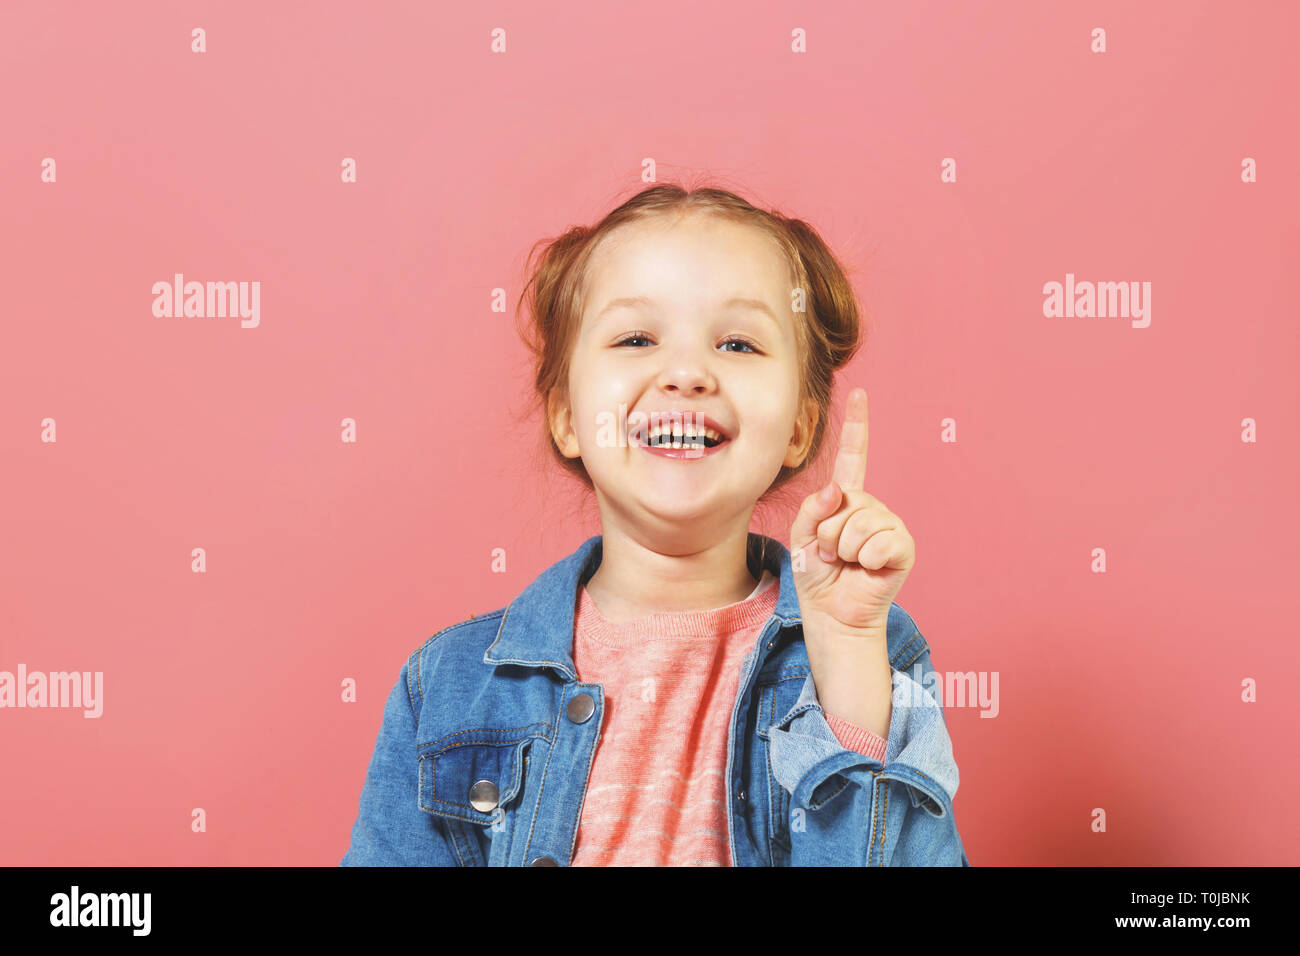 Funny little girl points her finger up. The concept of education. Pink background. Stock Photo